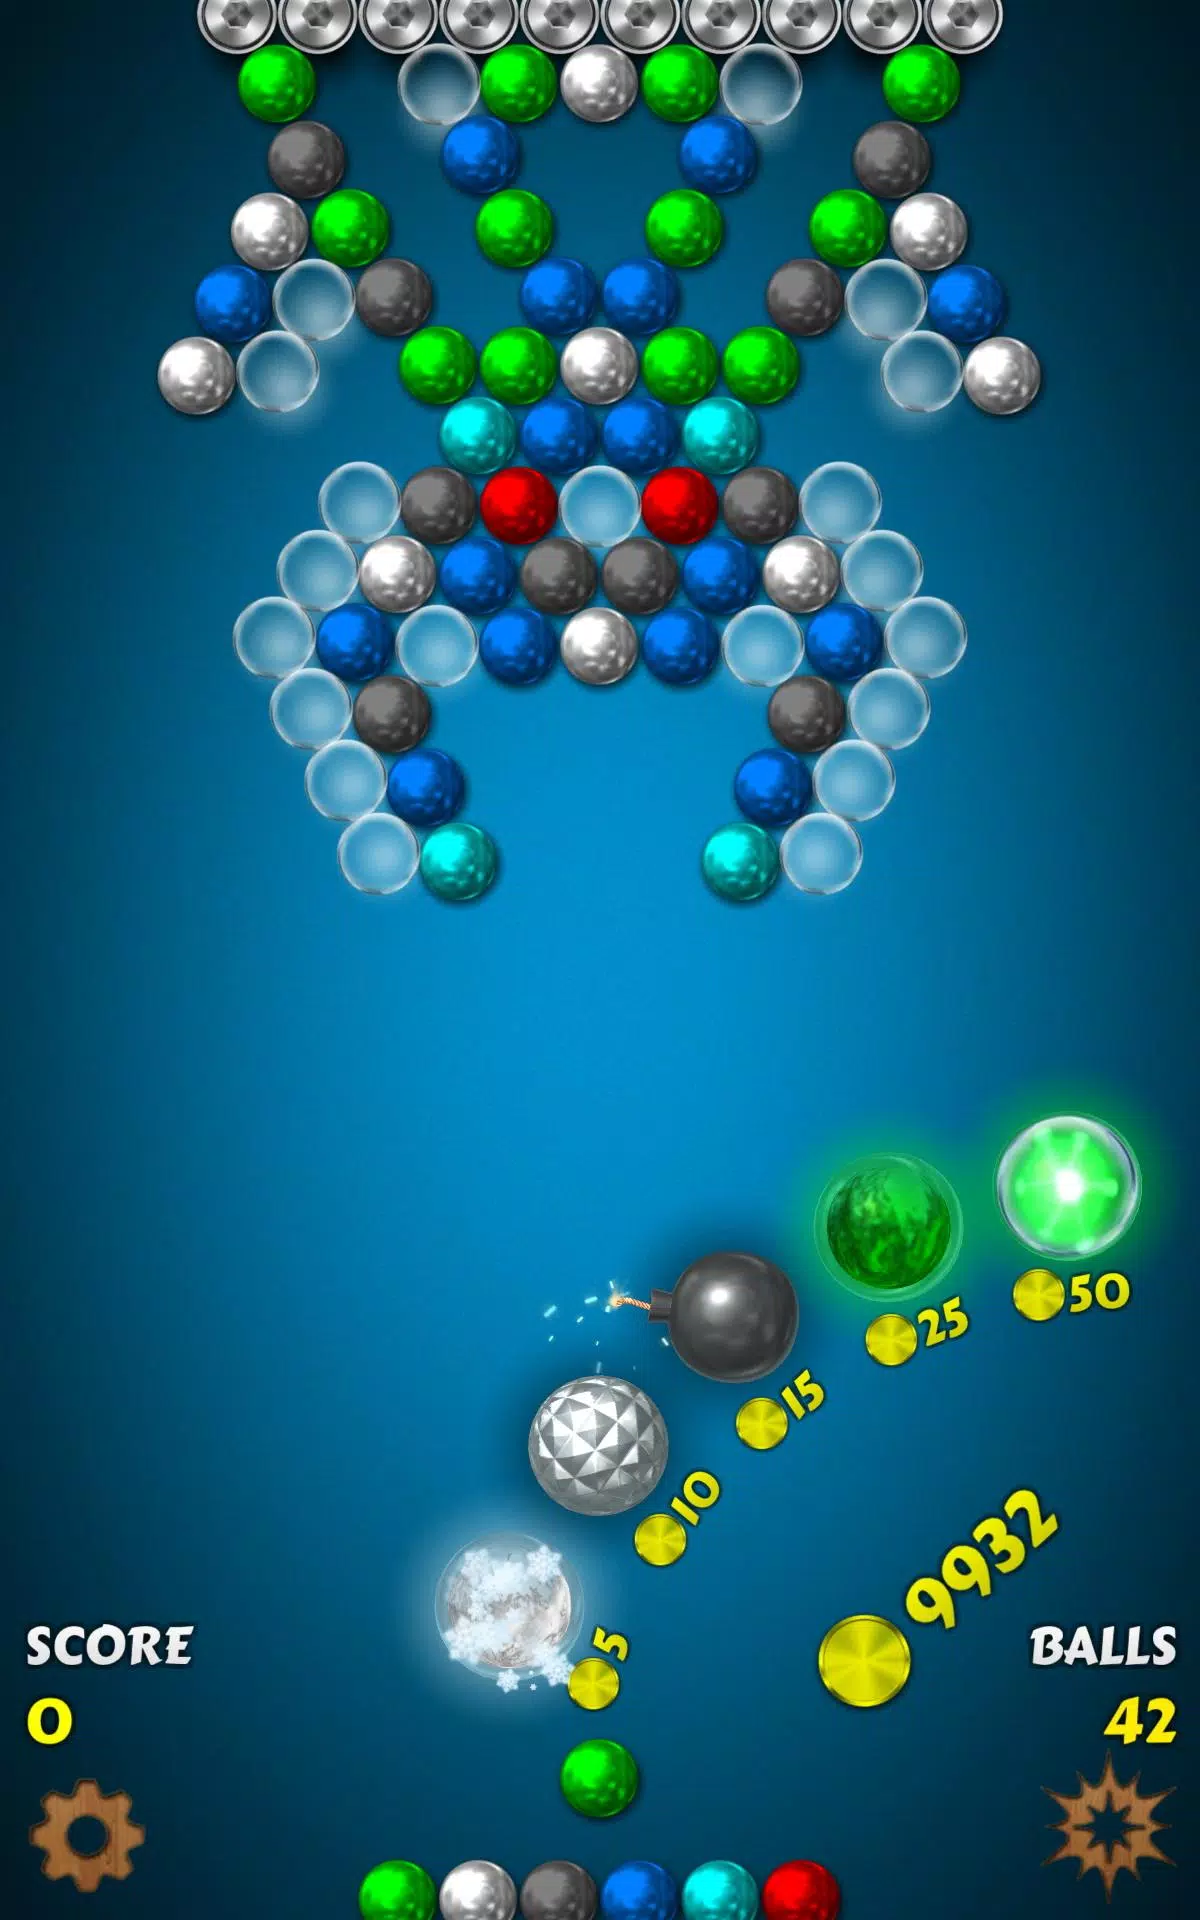 Magnet Balls 2: Physics Puzzle for Android - APK Download